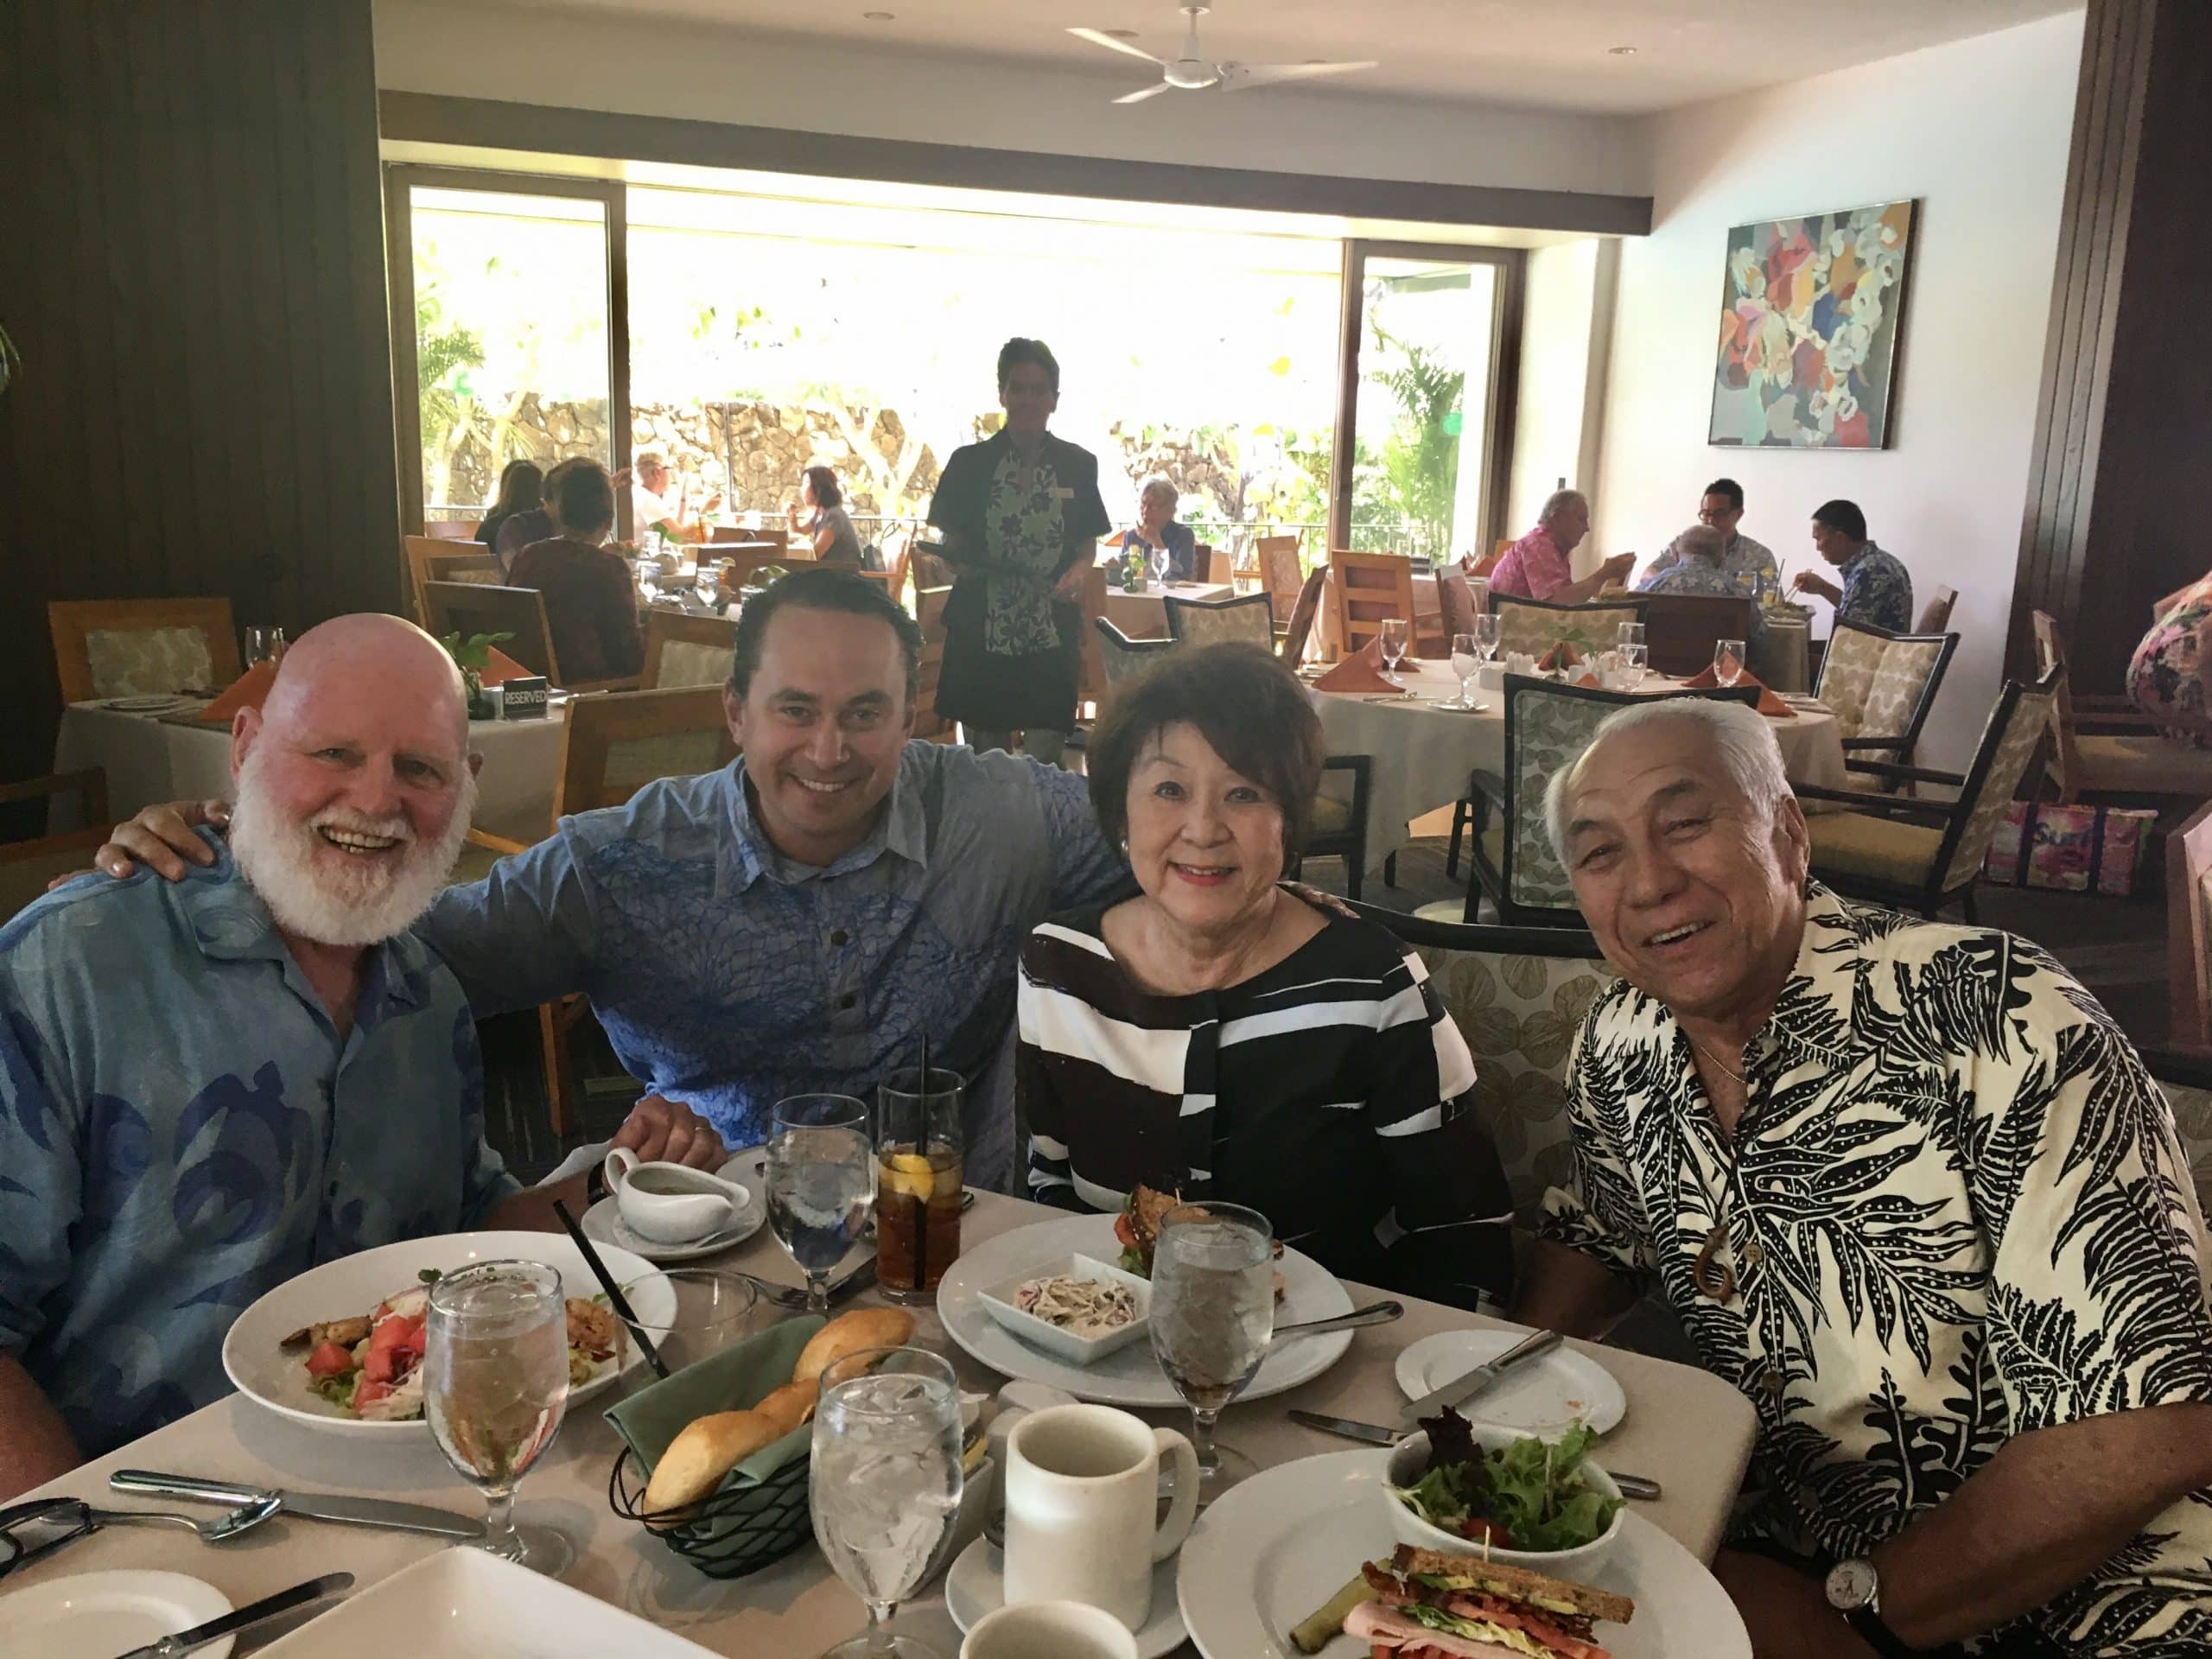 Lunch at Pacific Club with Gordo, Linda and Danny